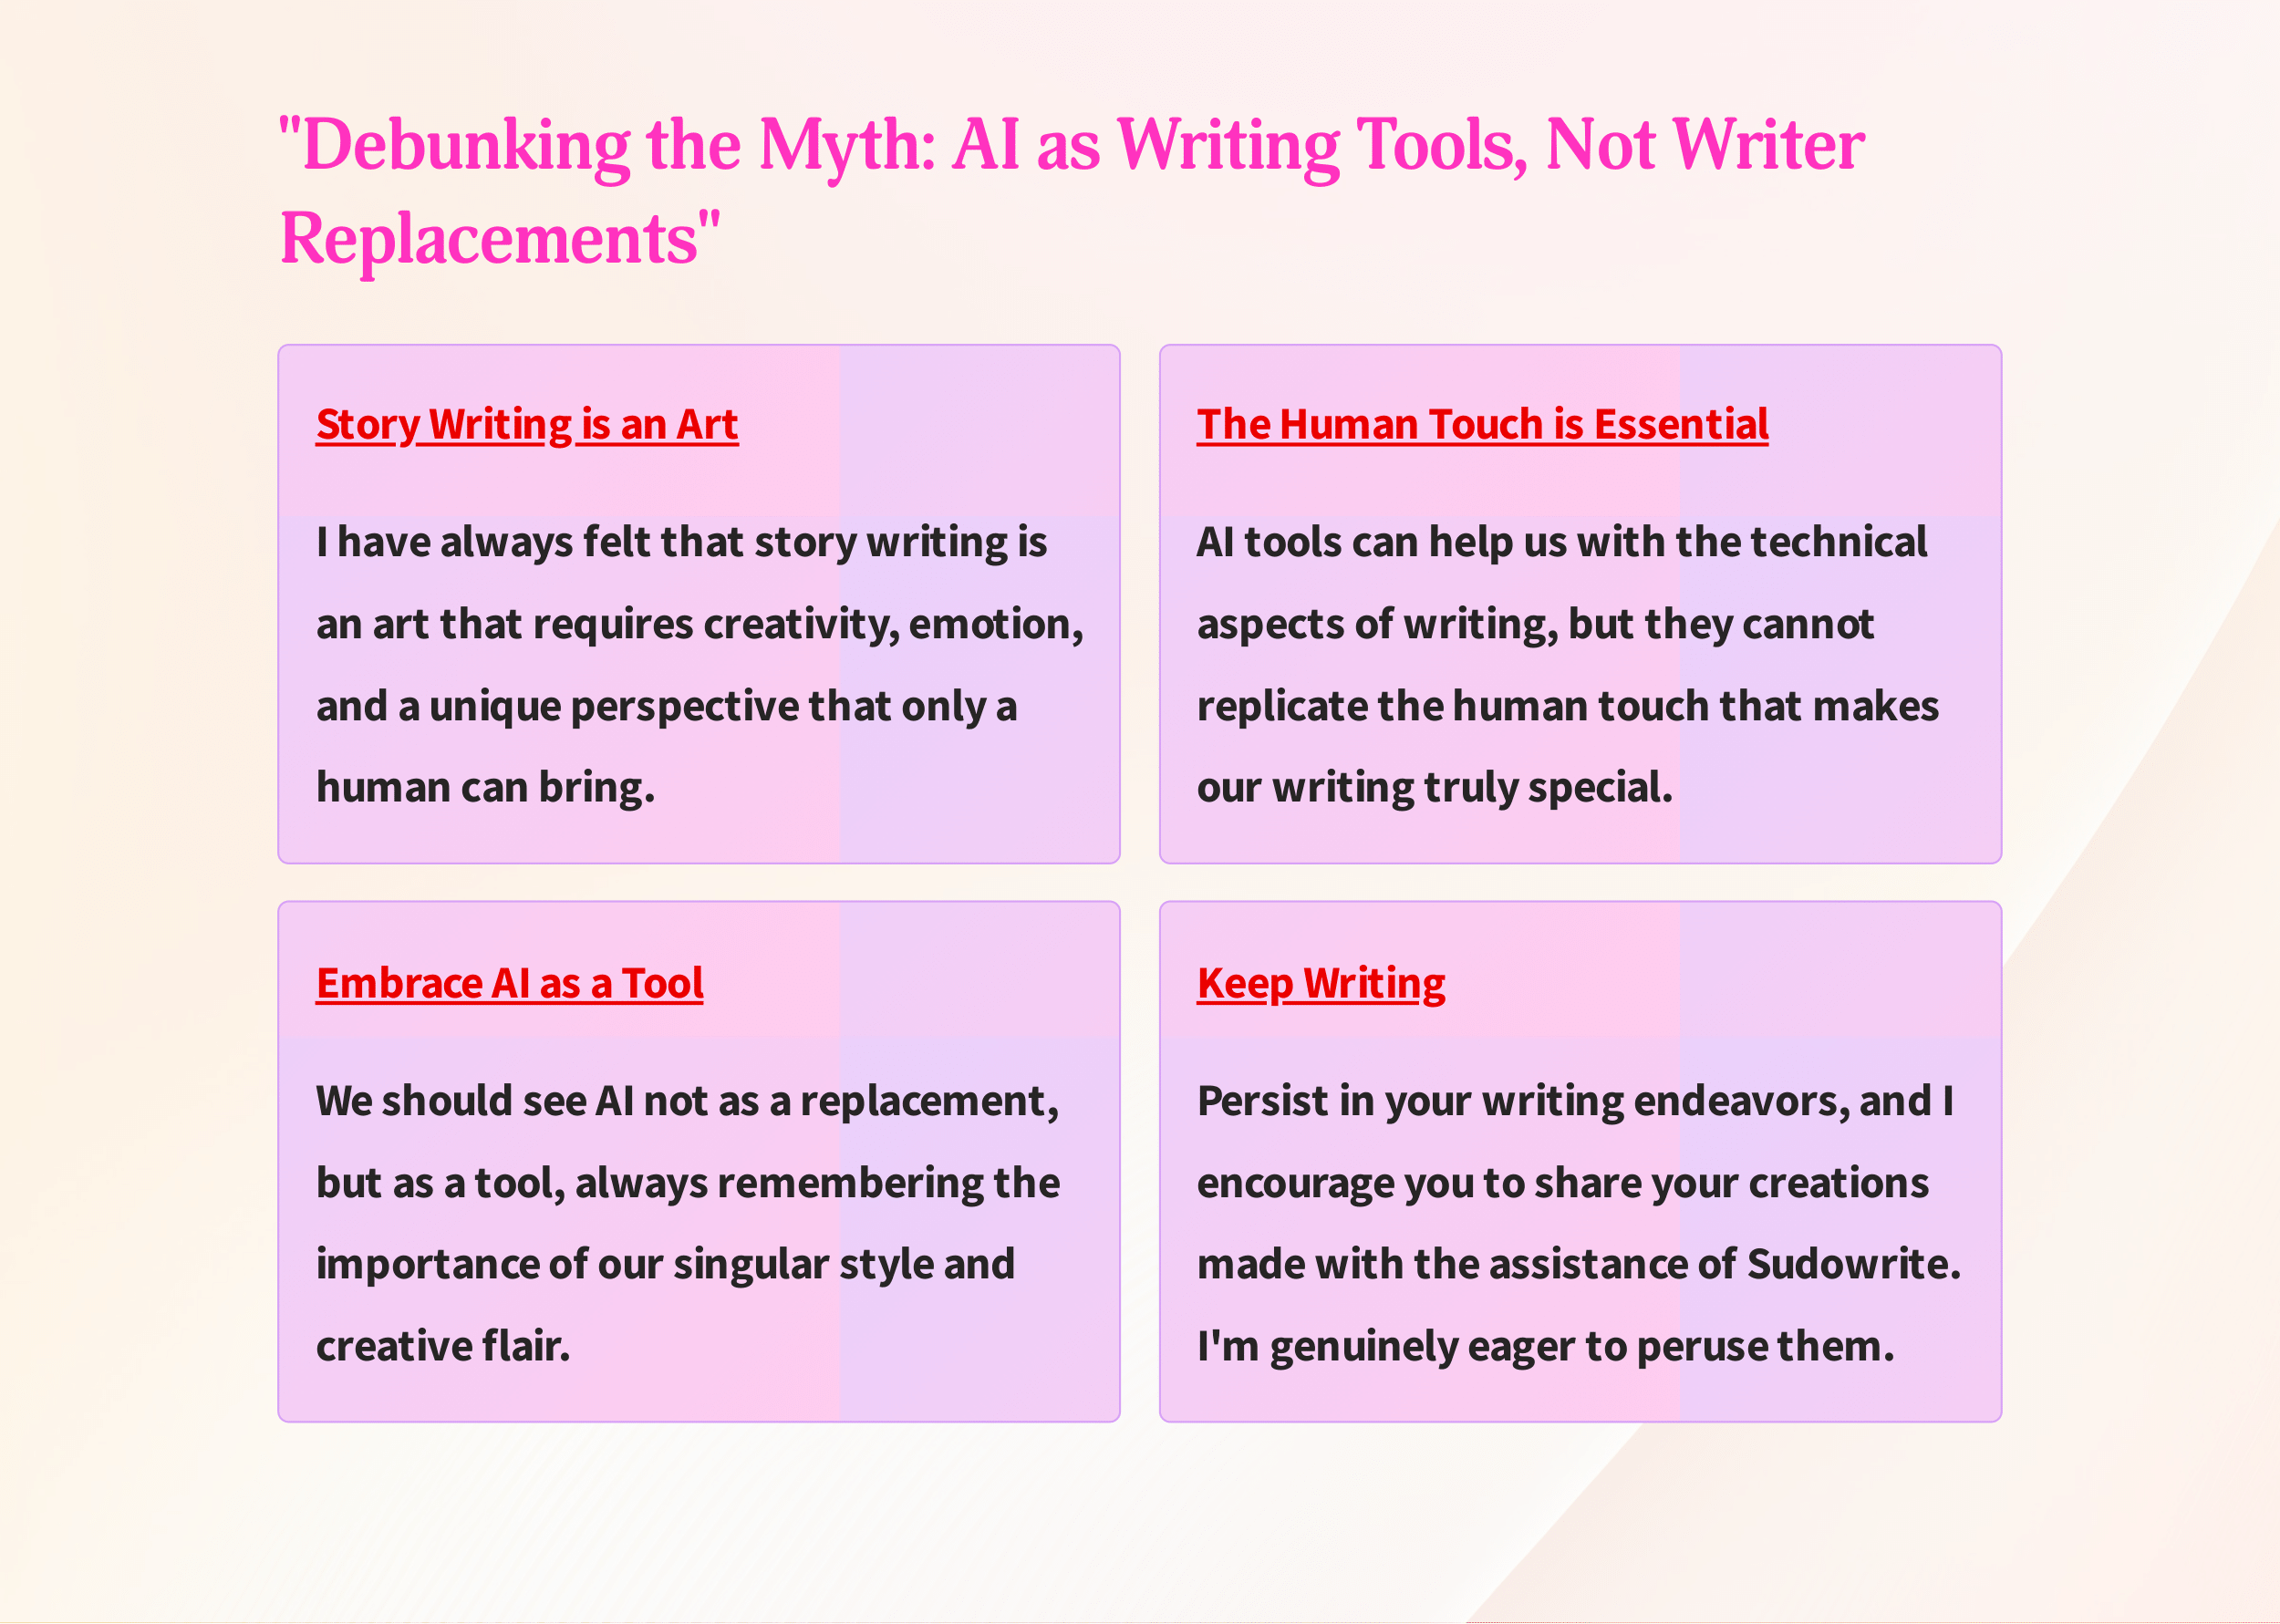 Debunking the Myth: A! writing tools, NOT writer's replacements